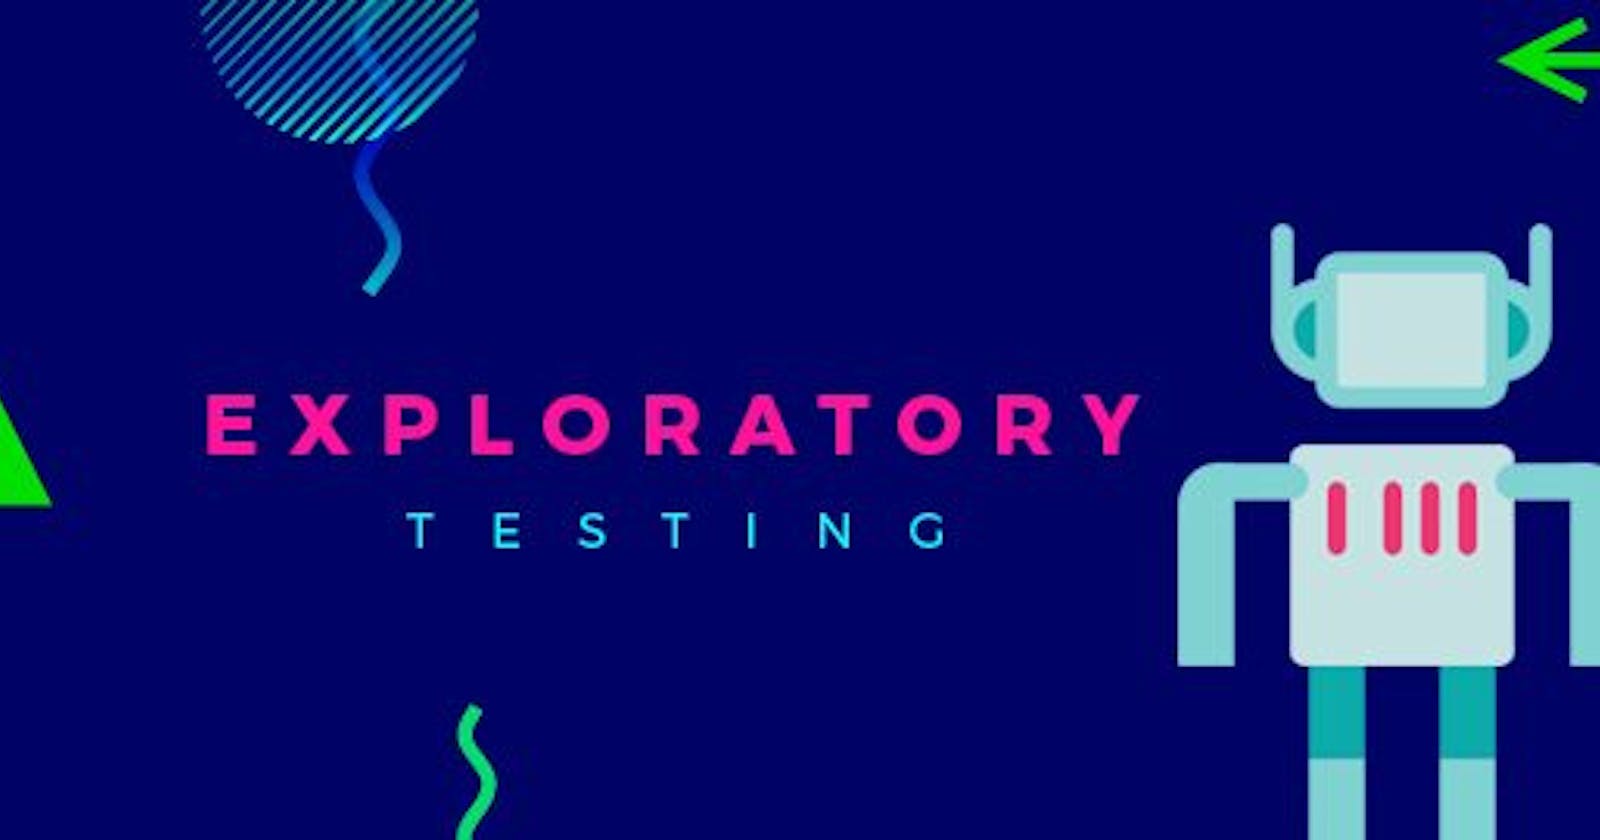 Exploratory Testing: Its All About Discovery